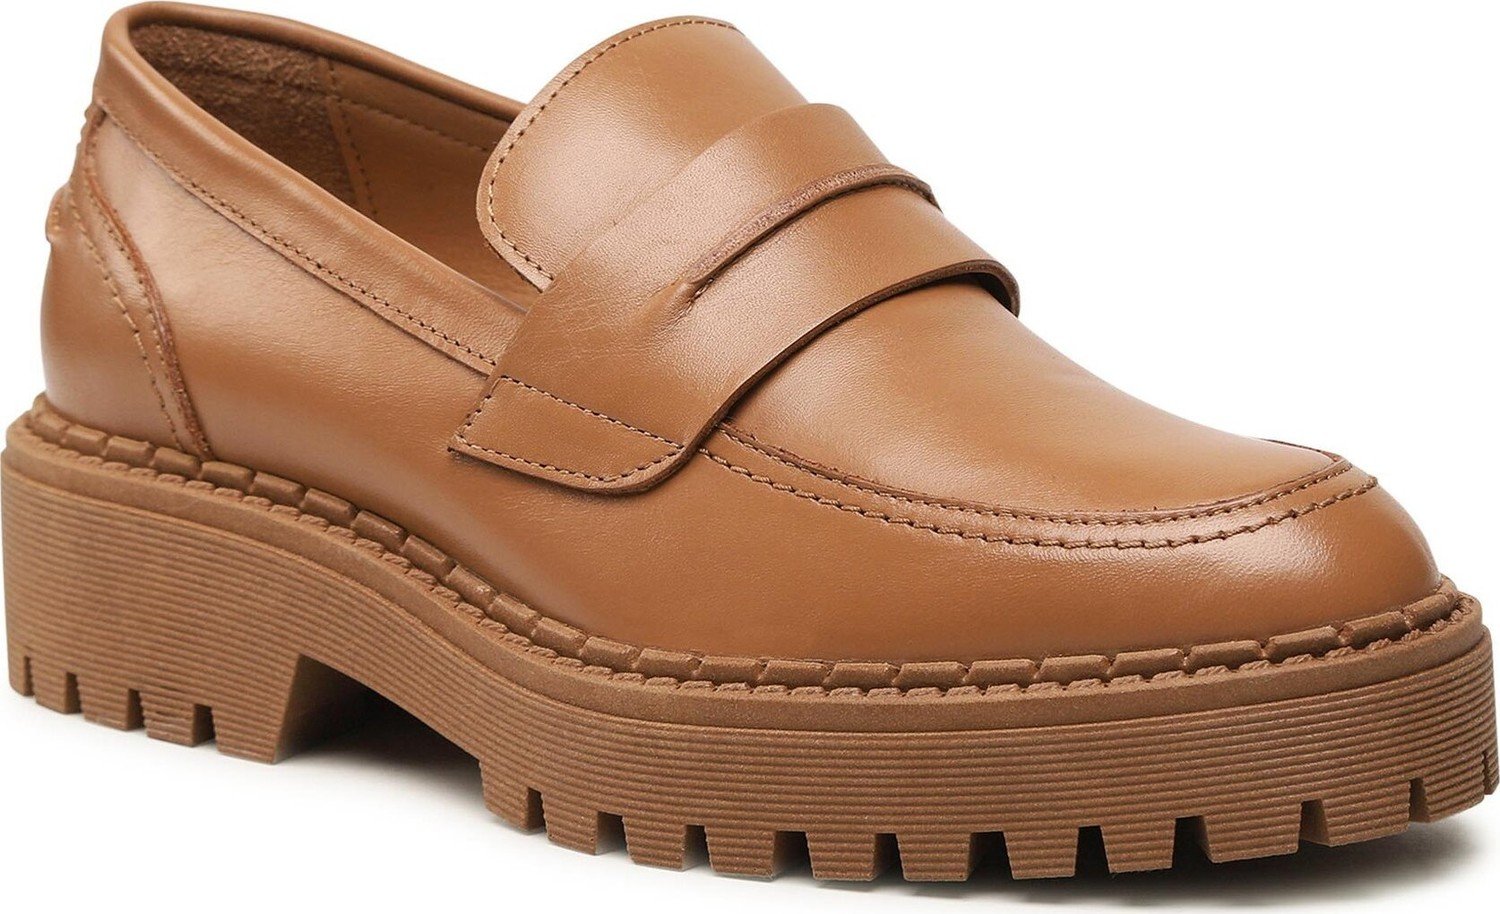 Loafersy Gino Rossi 23251 Camel